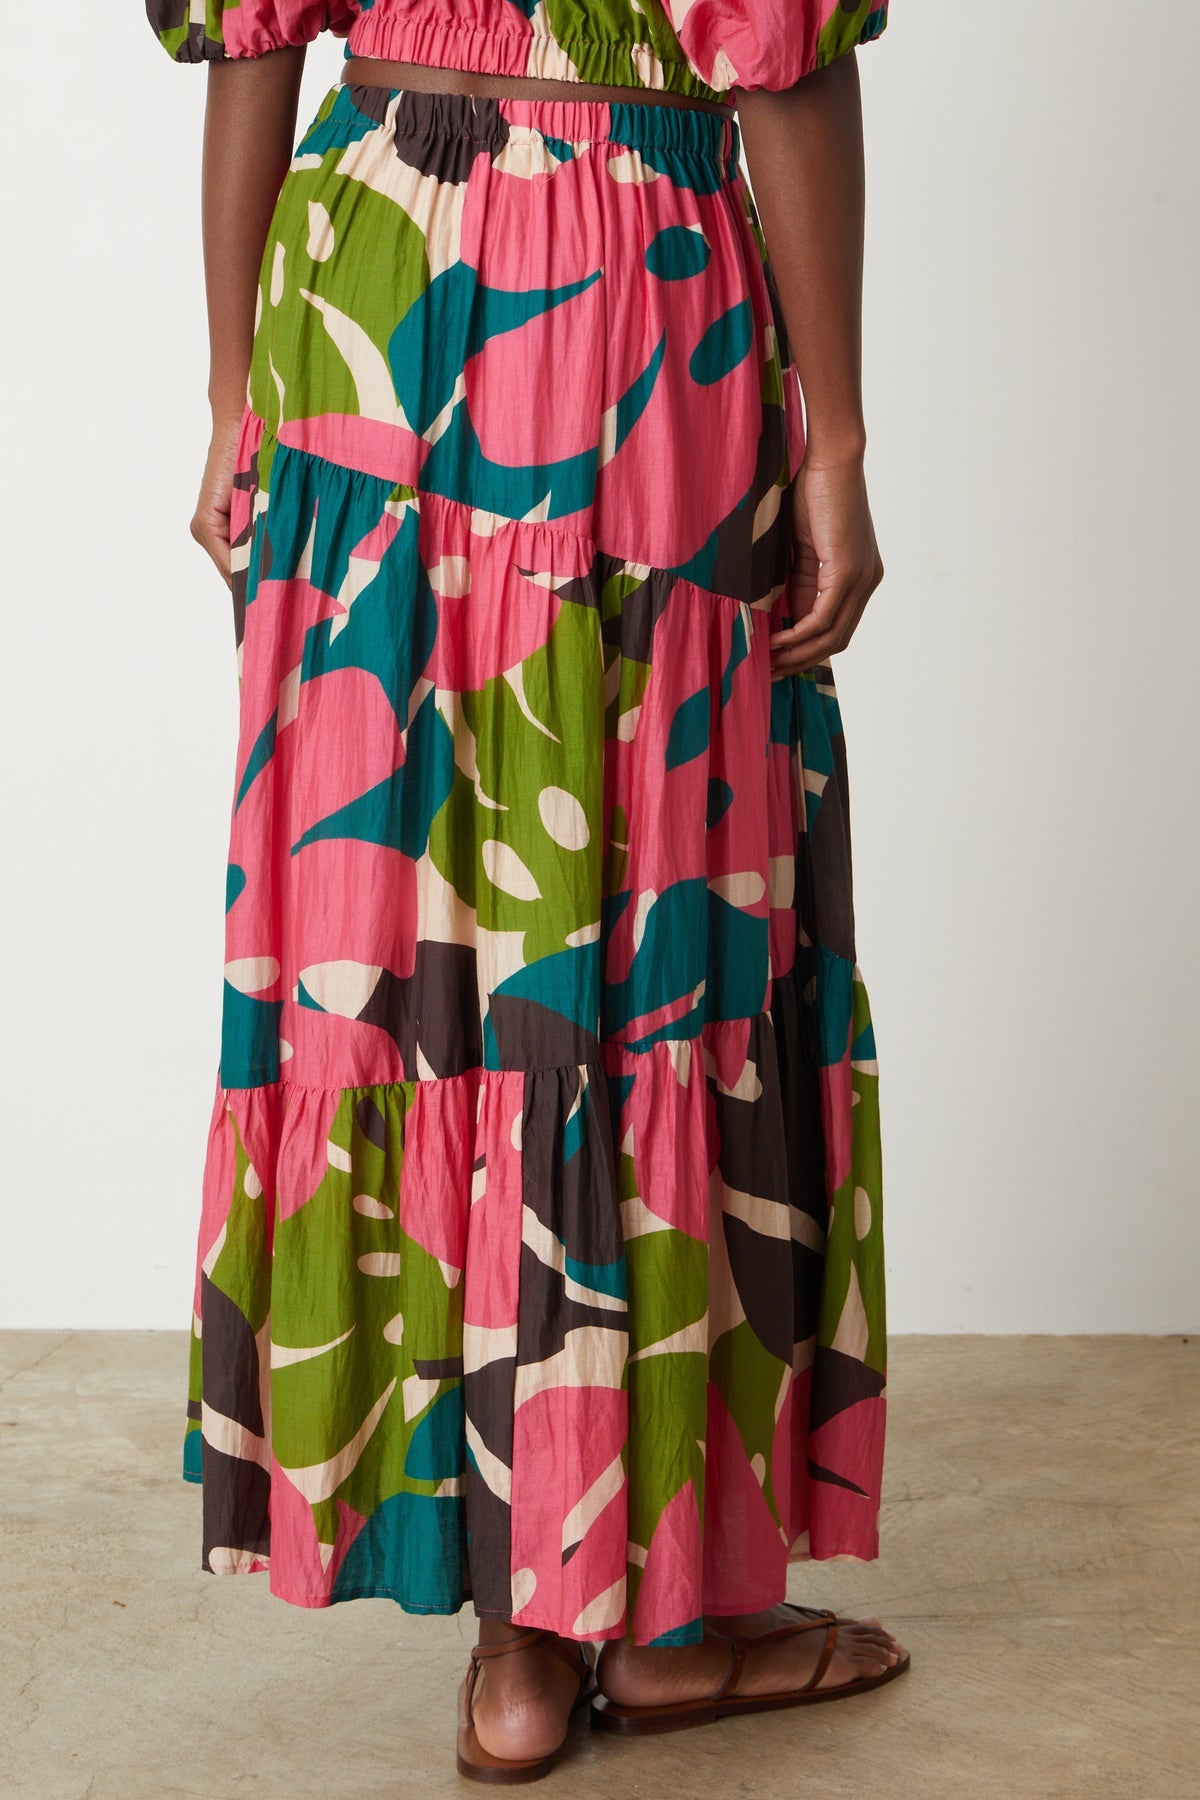 LYDIA SILK COTTON VOILE SKIRT - MULTI - Assembly Showroom